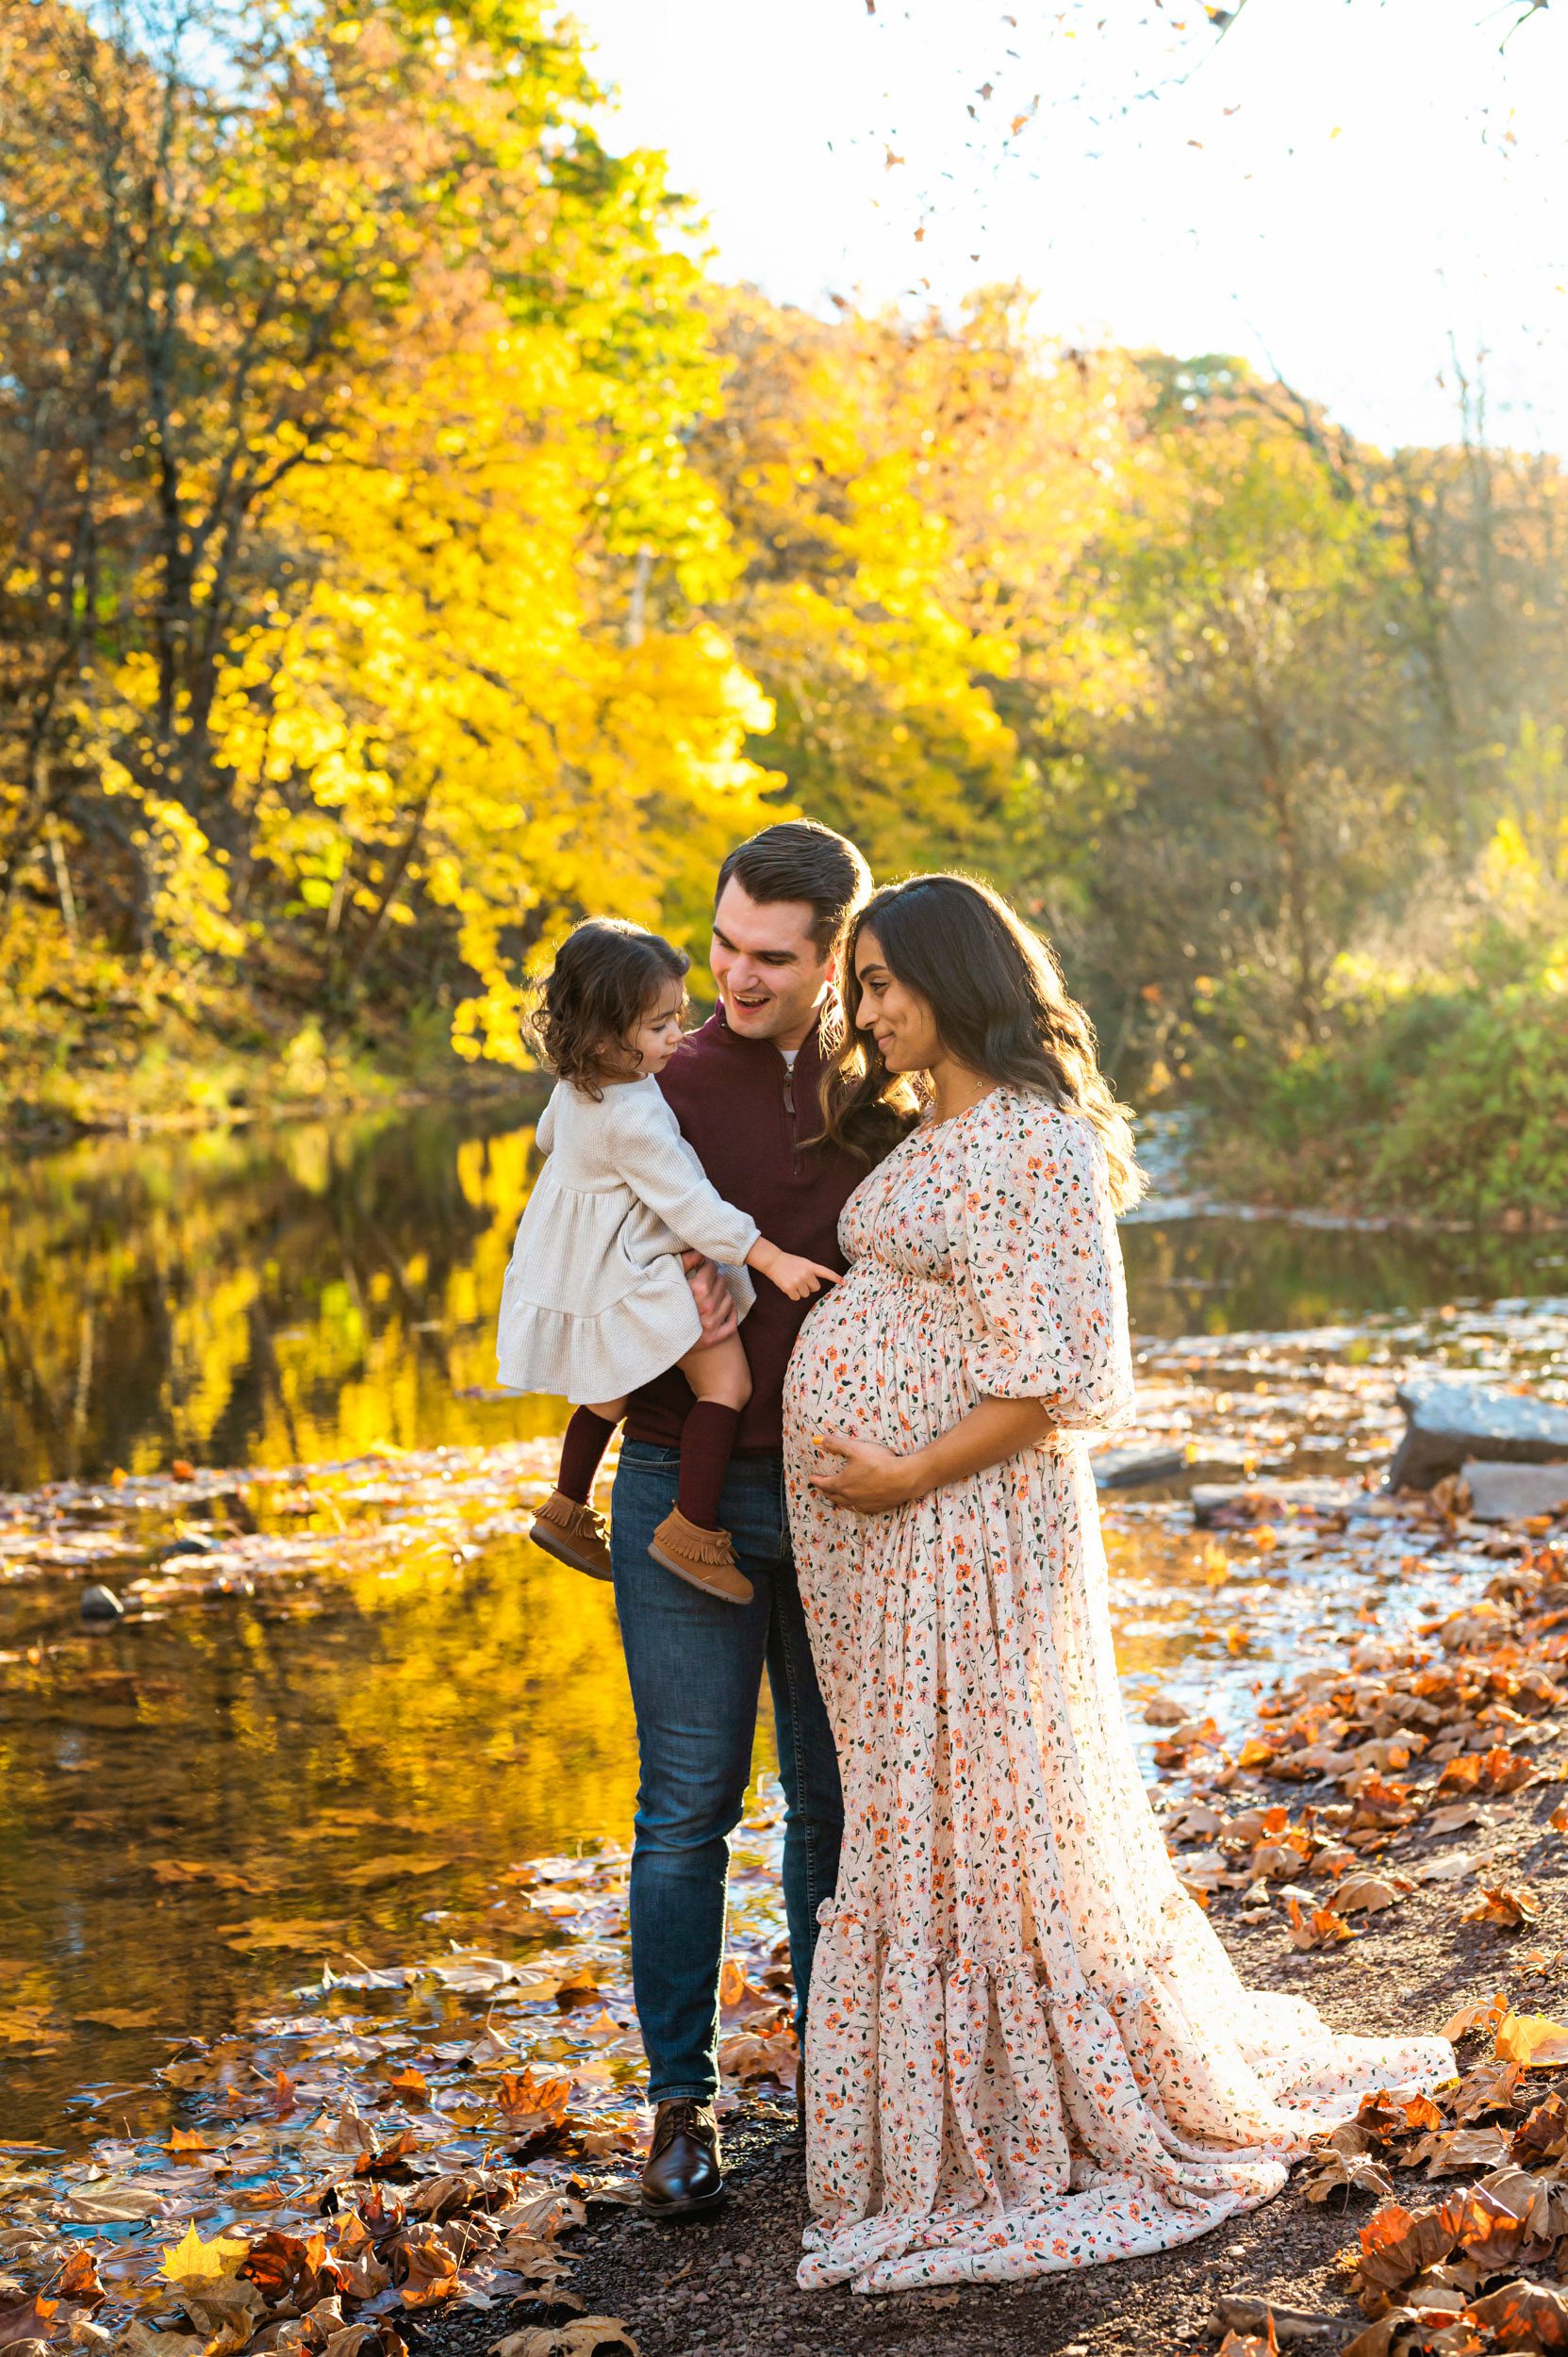 a pregnant mom standing on the edge of a creek while her young daughter points at her belly and the colorful fall leaves reflect off the water in the background during a maternity photoshoot